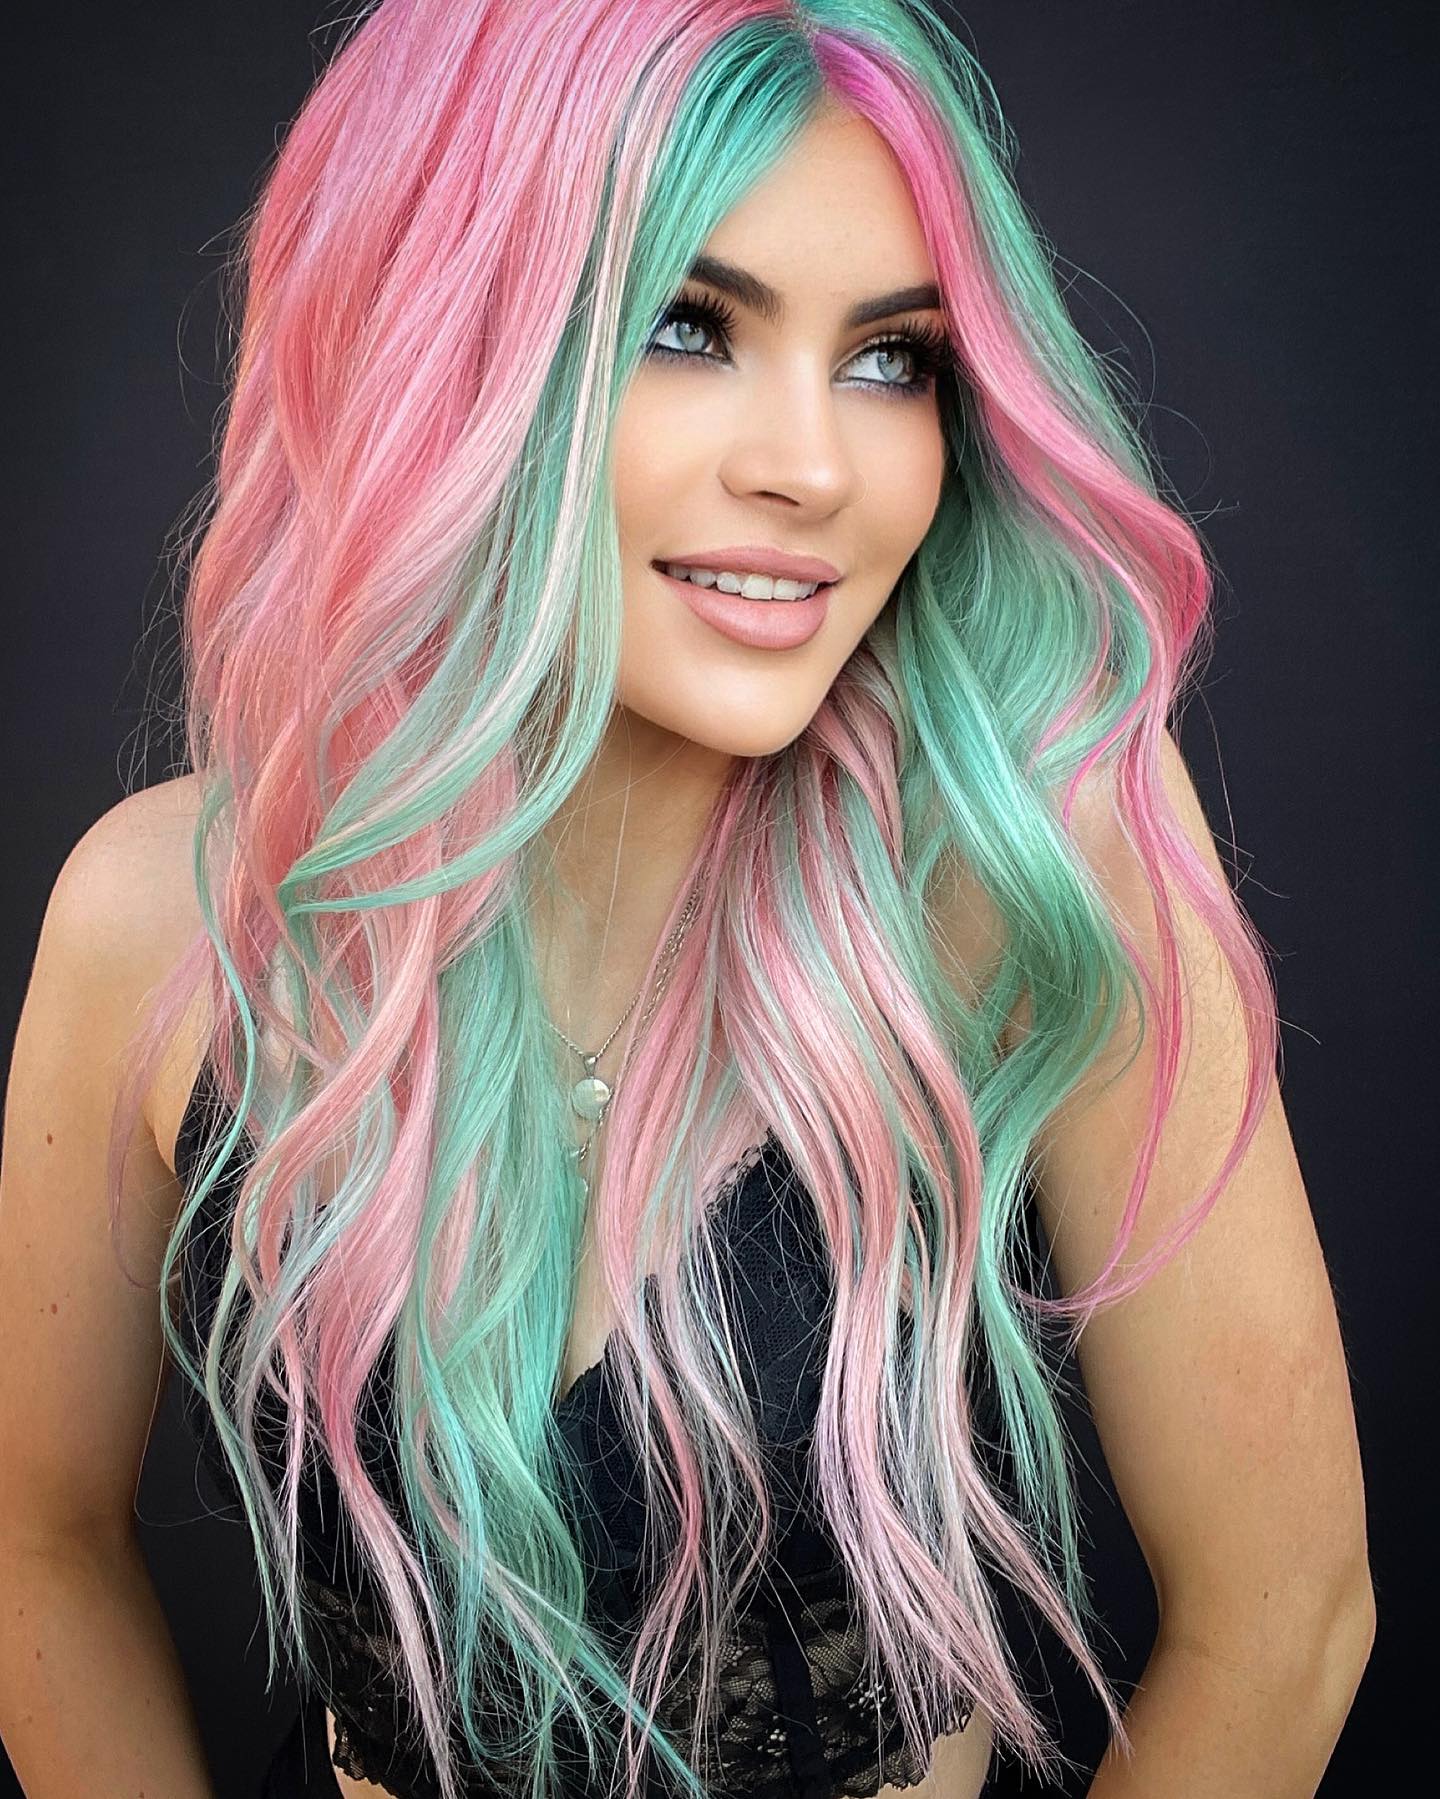 100+ Best Colorful Hair Ideas images 17